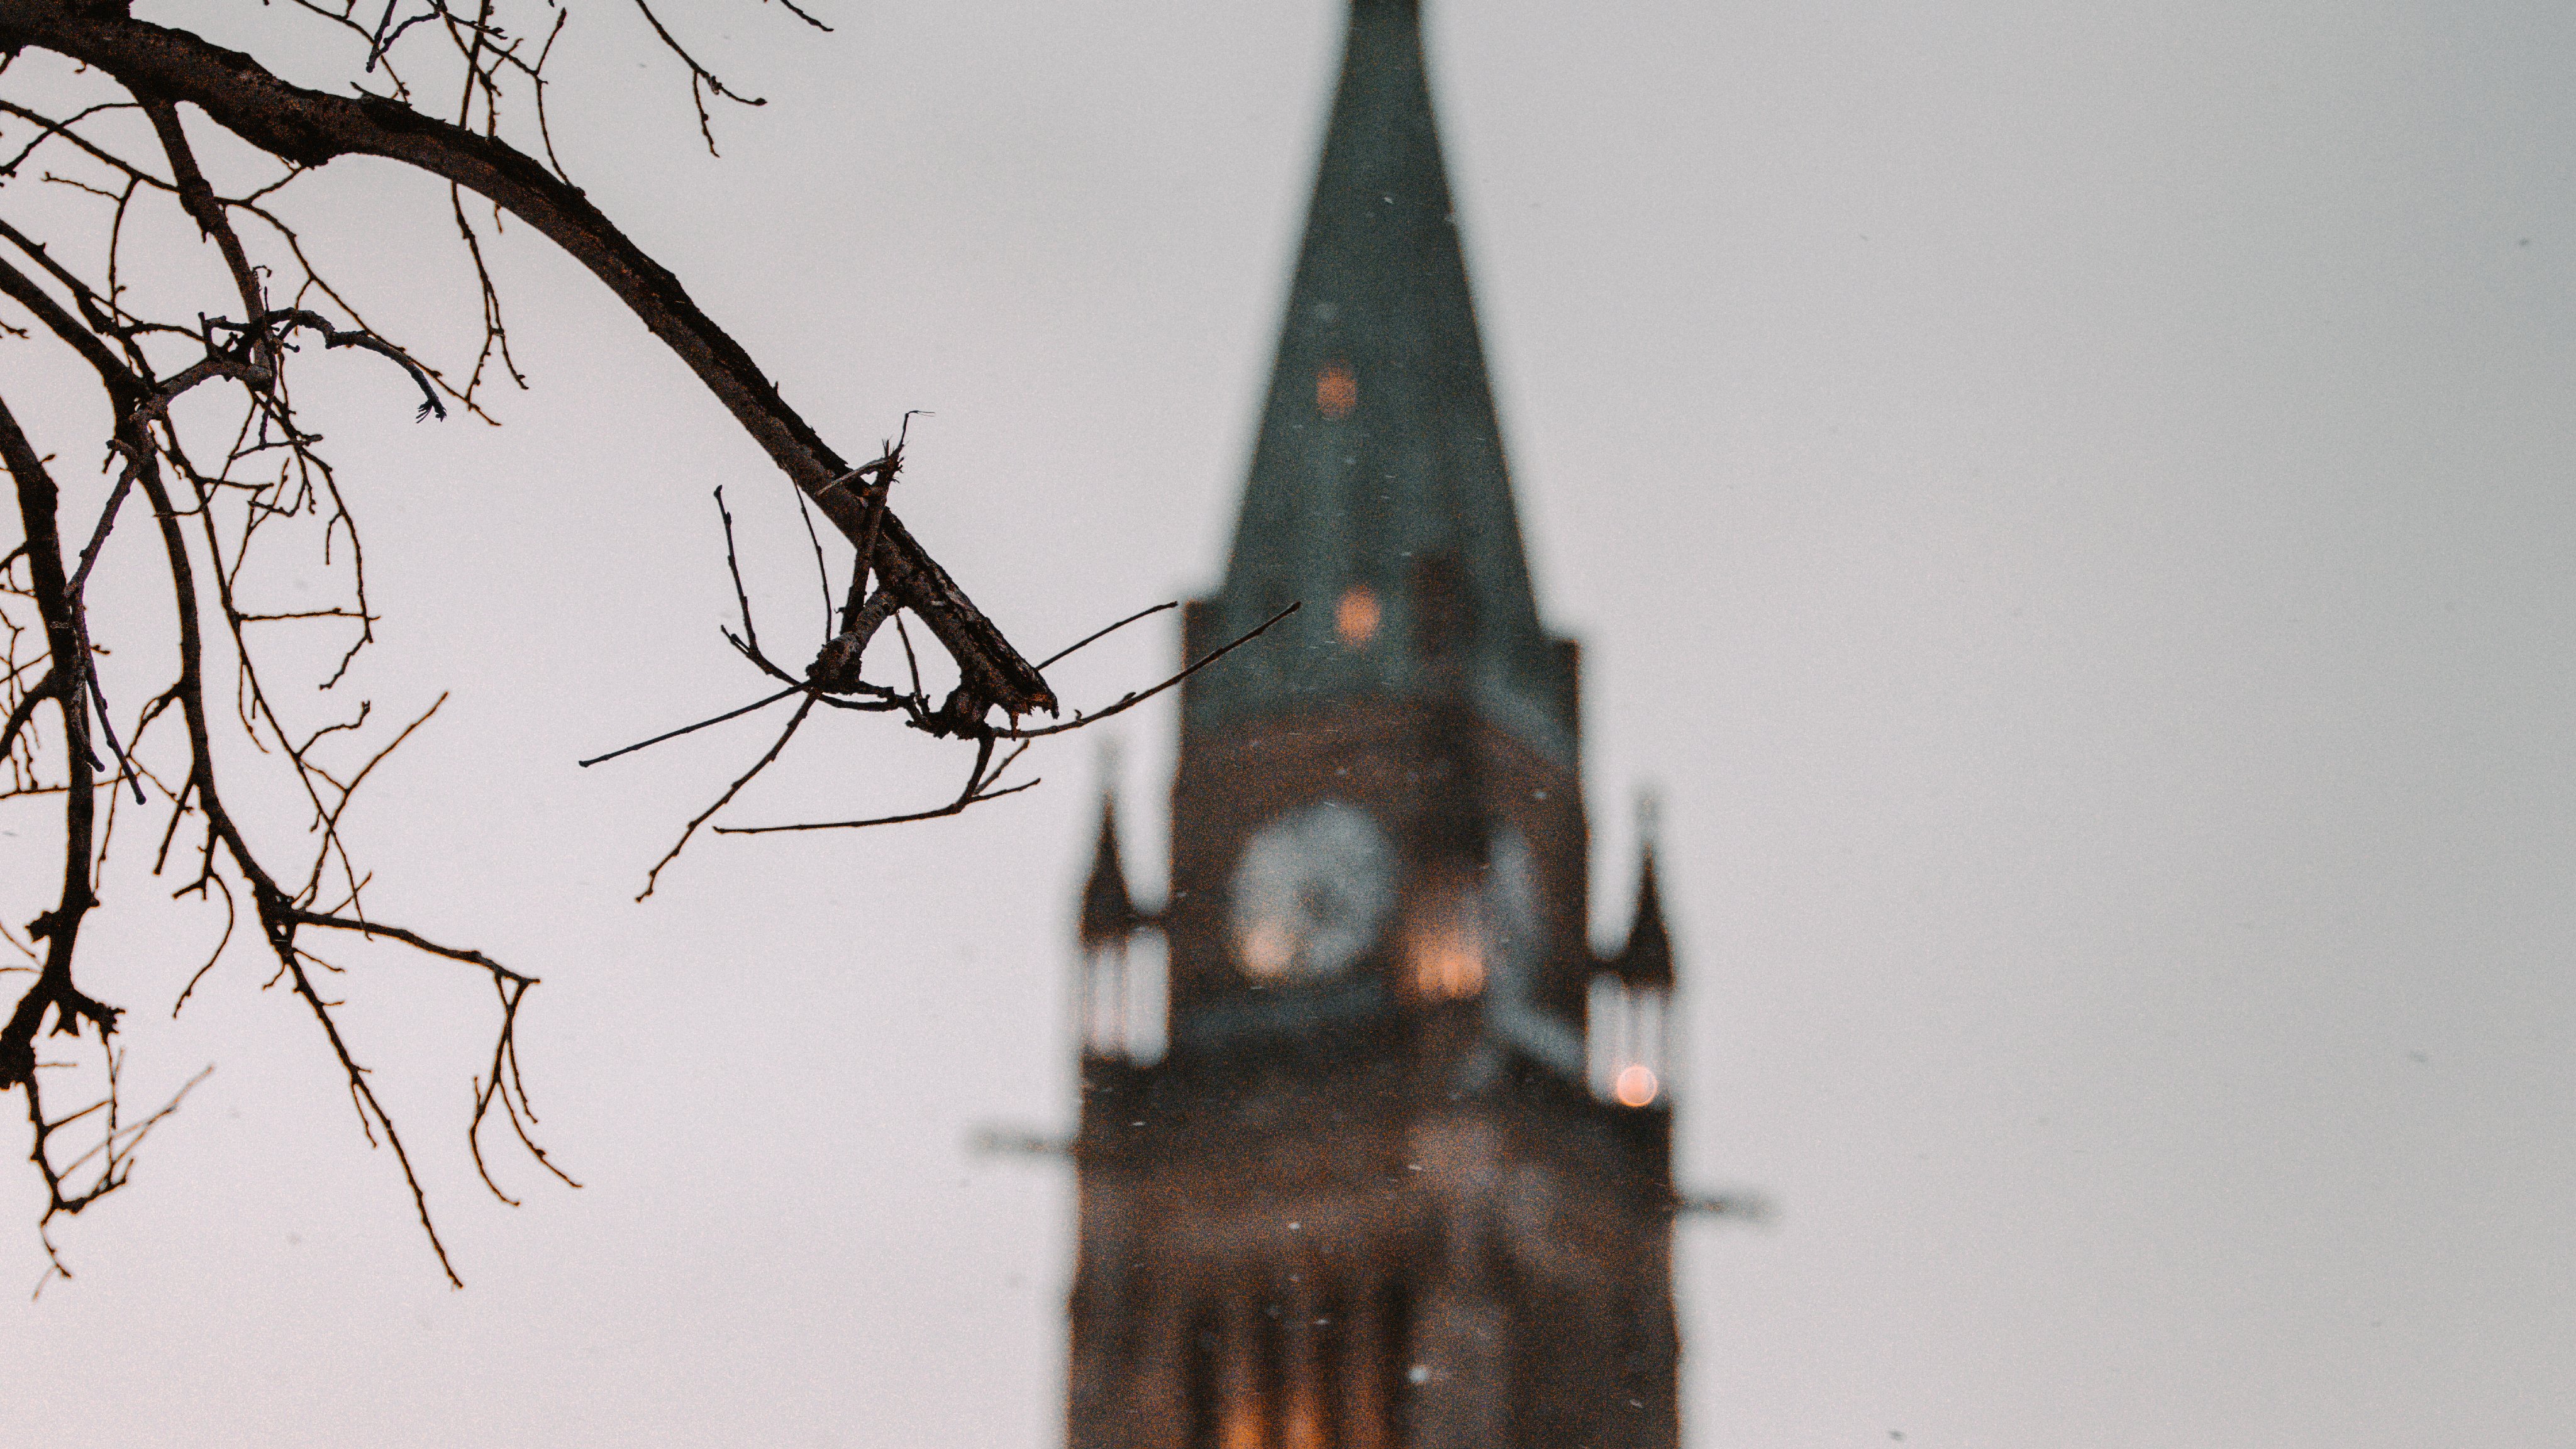 The Peace Tower with a tree branch in focus